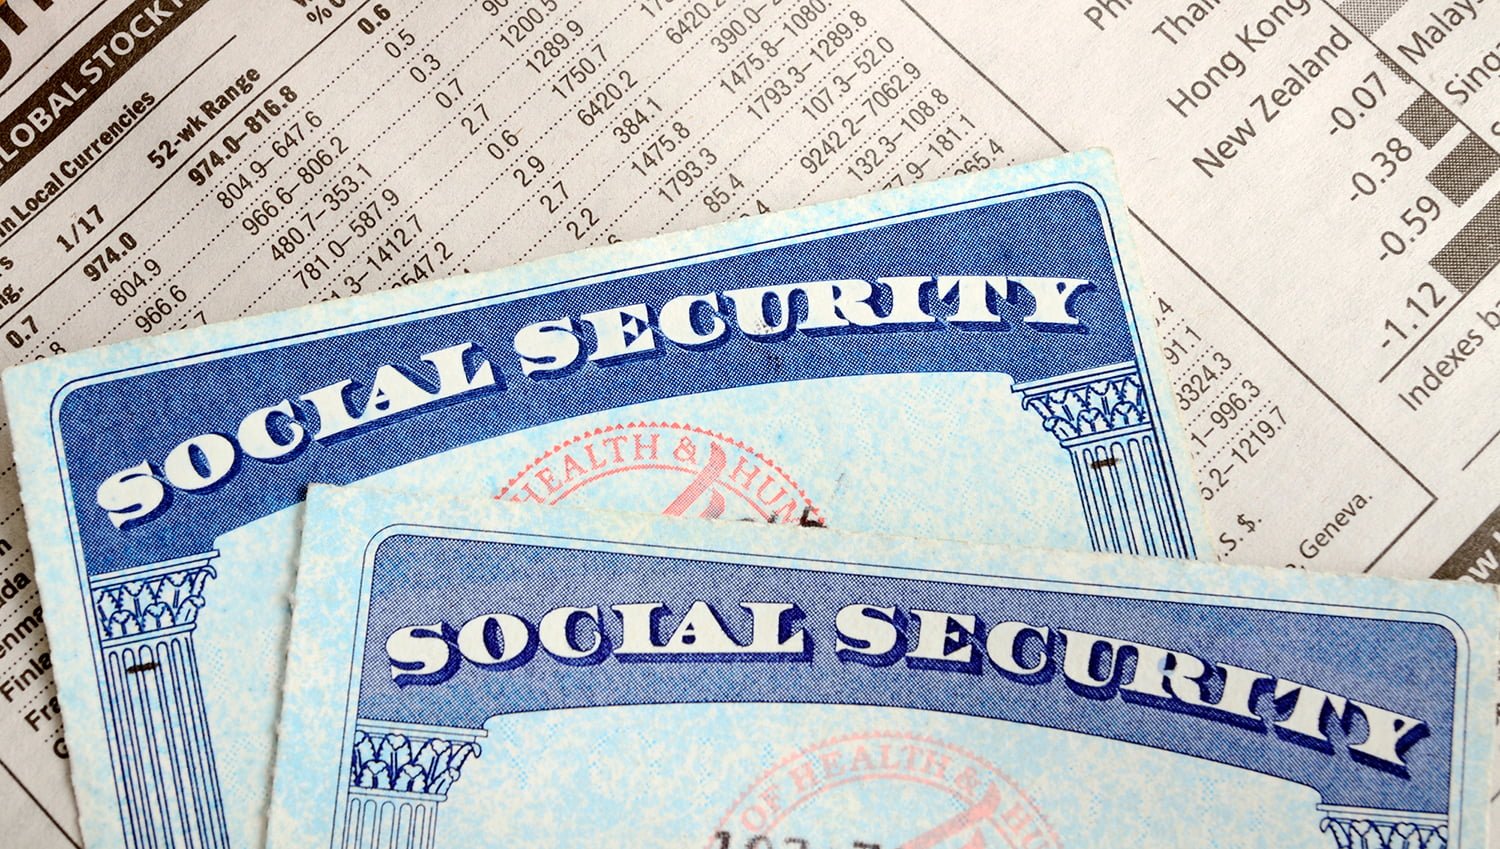 Social Security cards over a newspaper with stock market information